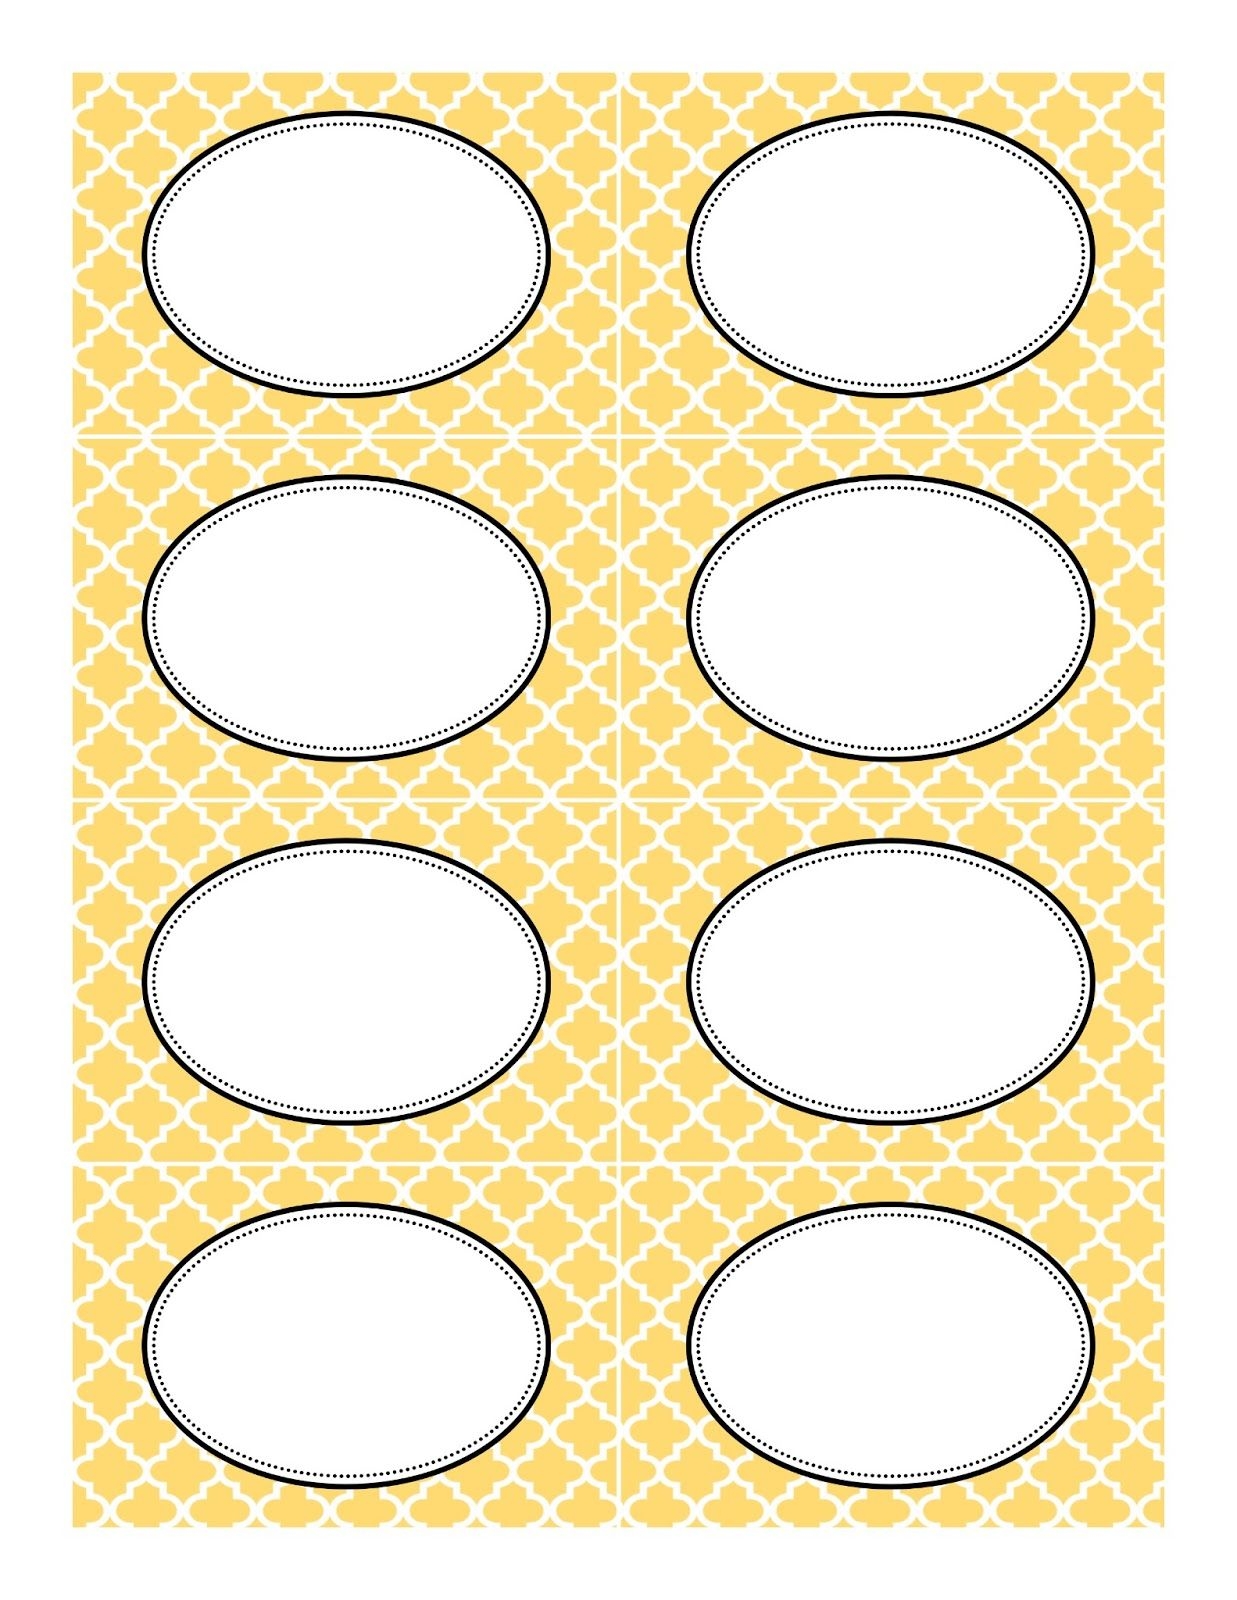 Candy Buffet Supplies Free Printable Labels Labels Printables Free Printable Label Templates Printable Labels - Free Printable Candy Buffet Labels Templates